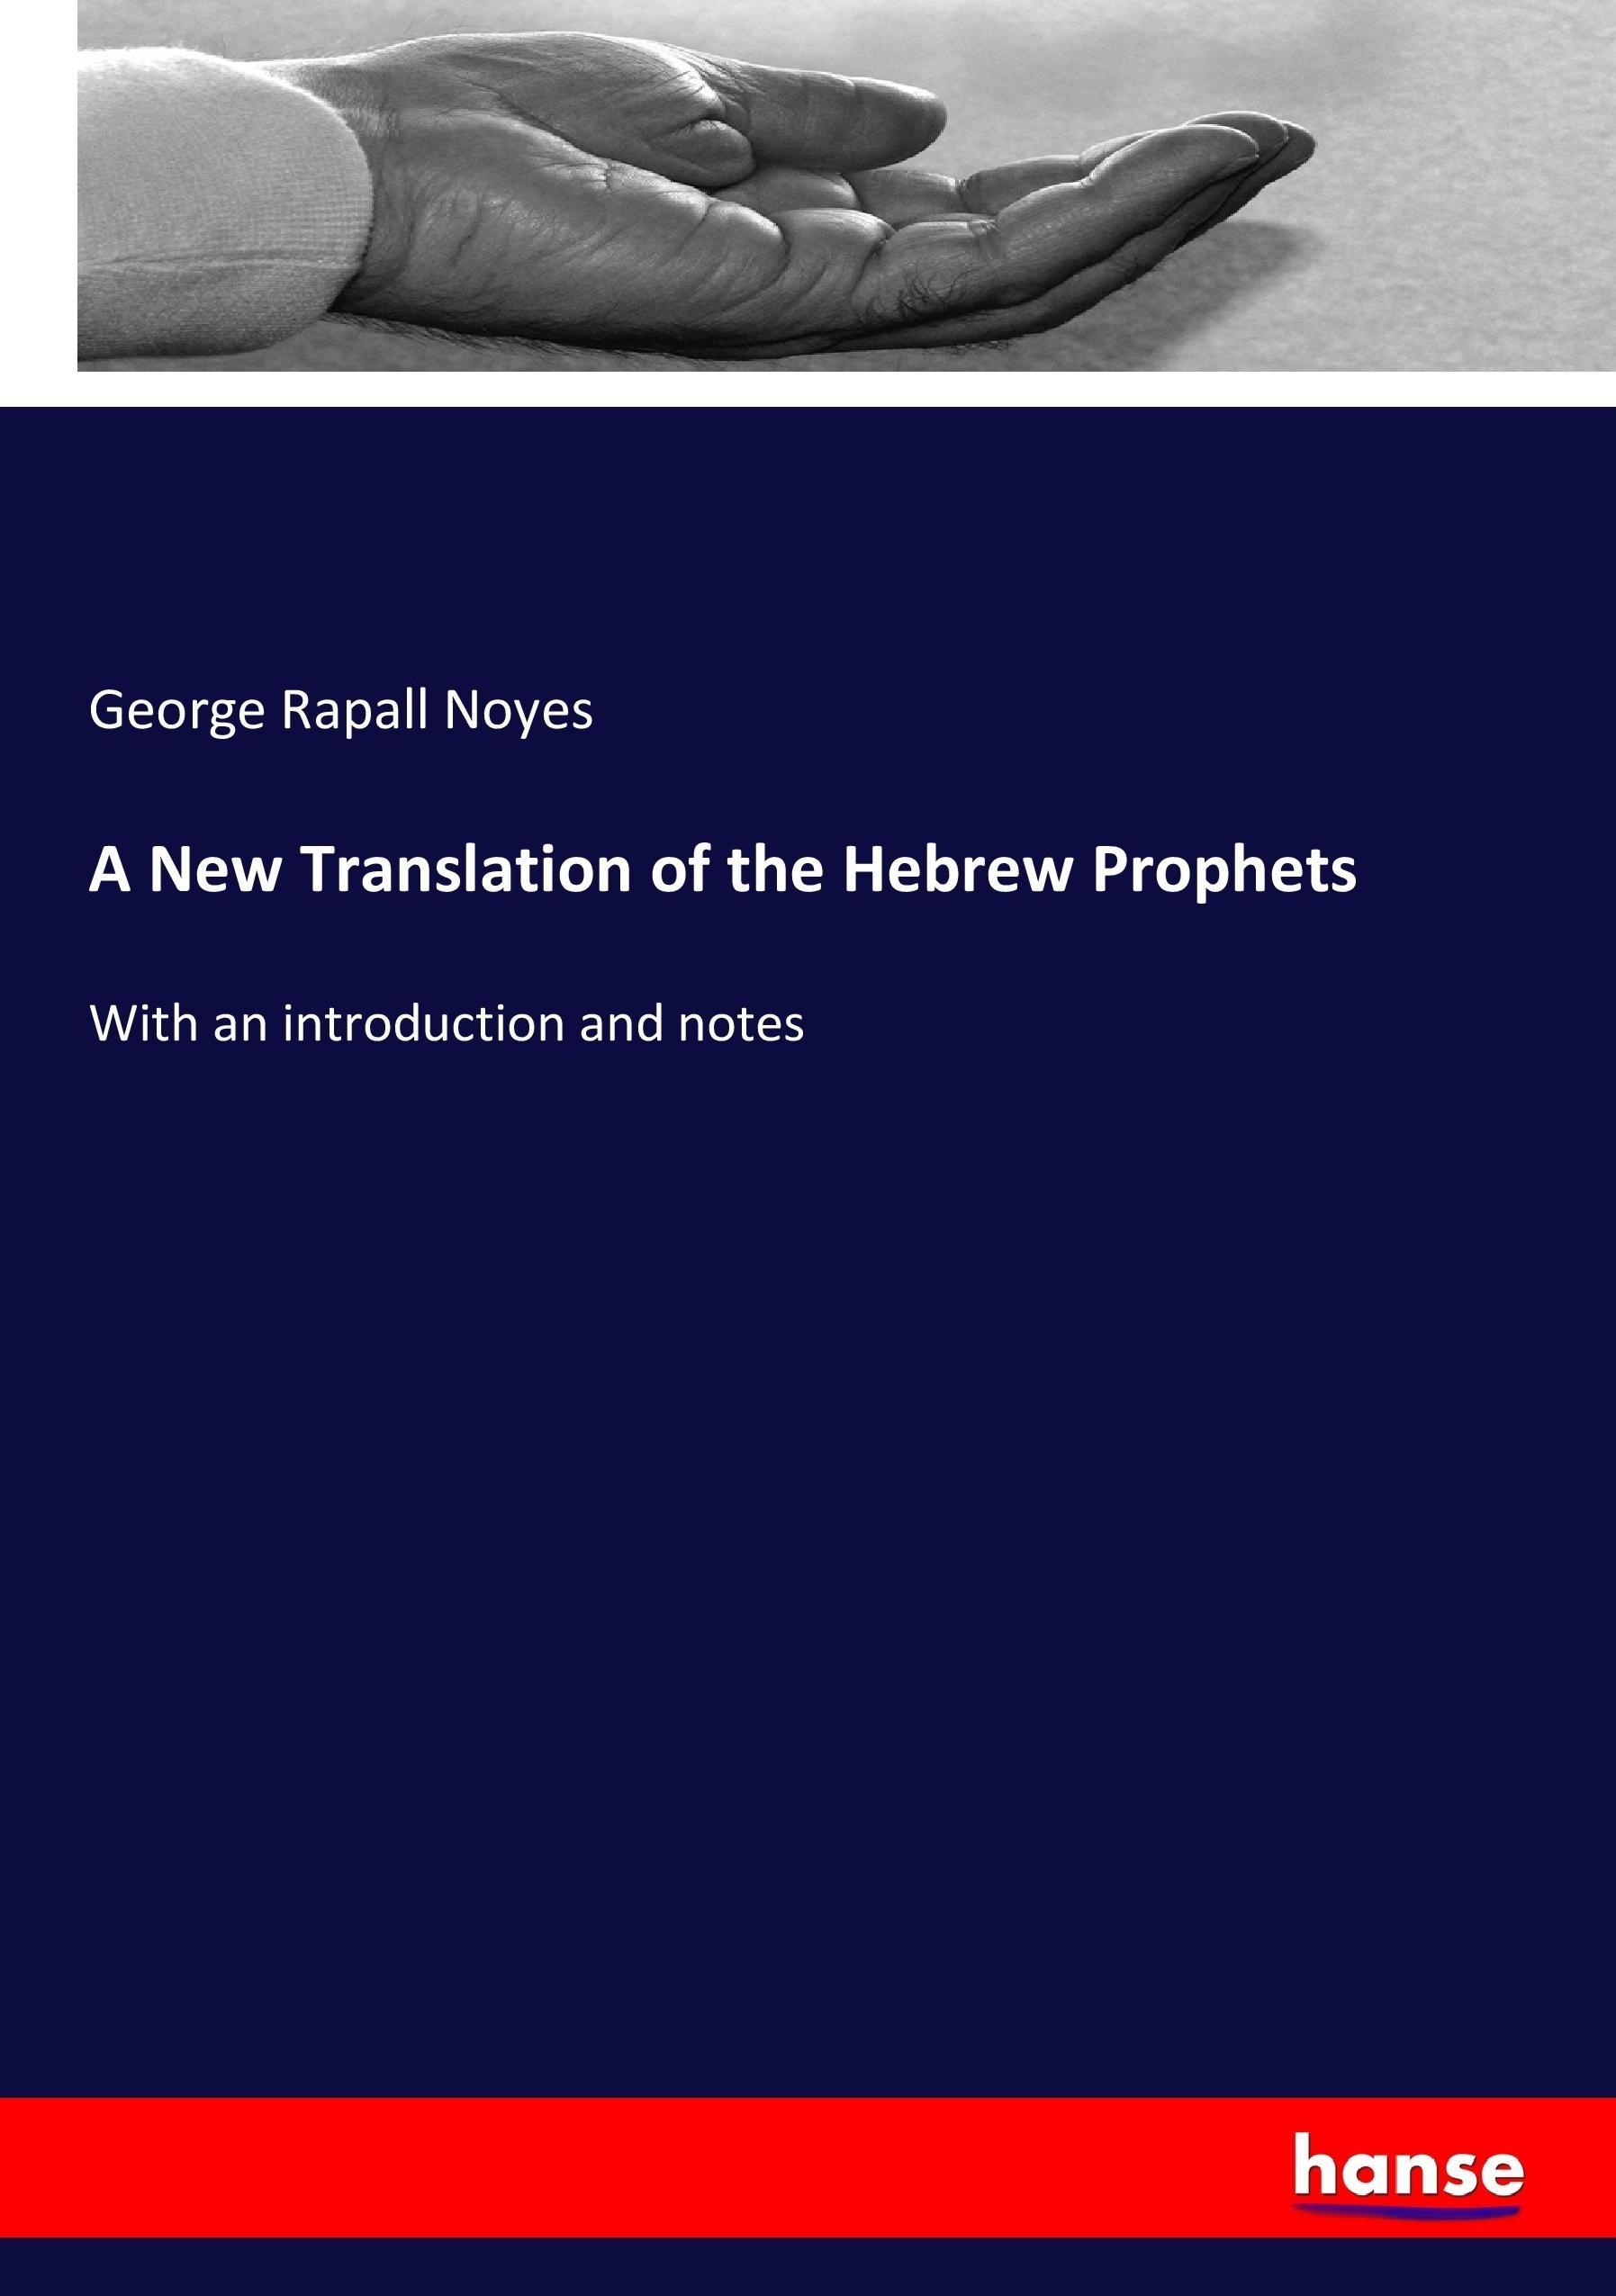 A New Translation of the Hebrew Prophets | With an introduction and notes | George Rapall Noyes | Taschenbuch | Paperback | 368 S. | Englisch | 2017 | hansebooks | EAN 9783337036515 - Noyes, George Rapall